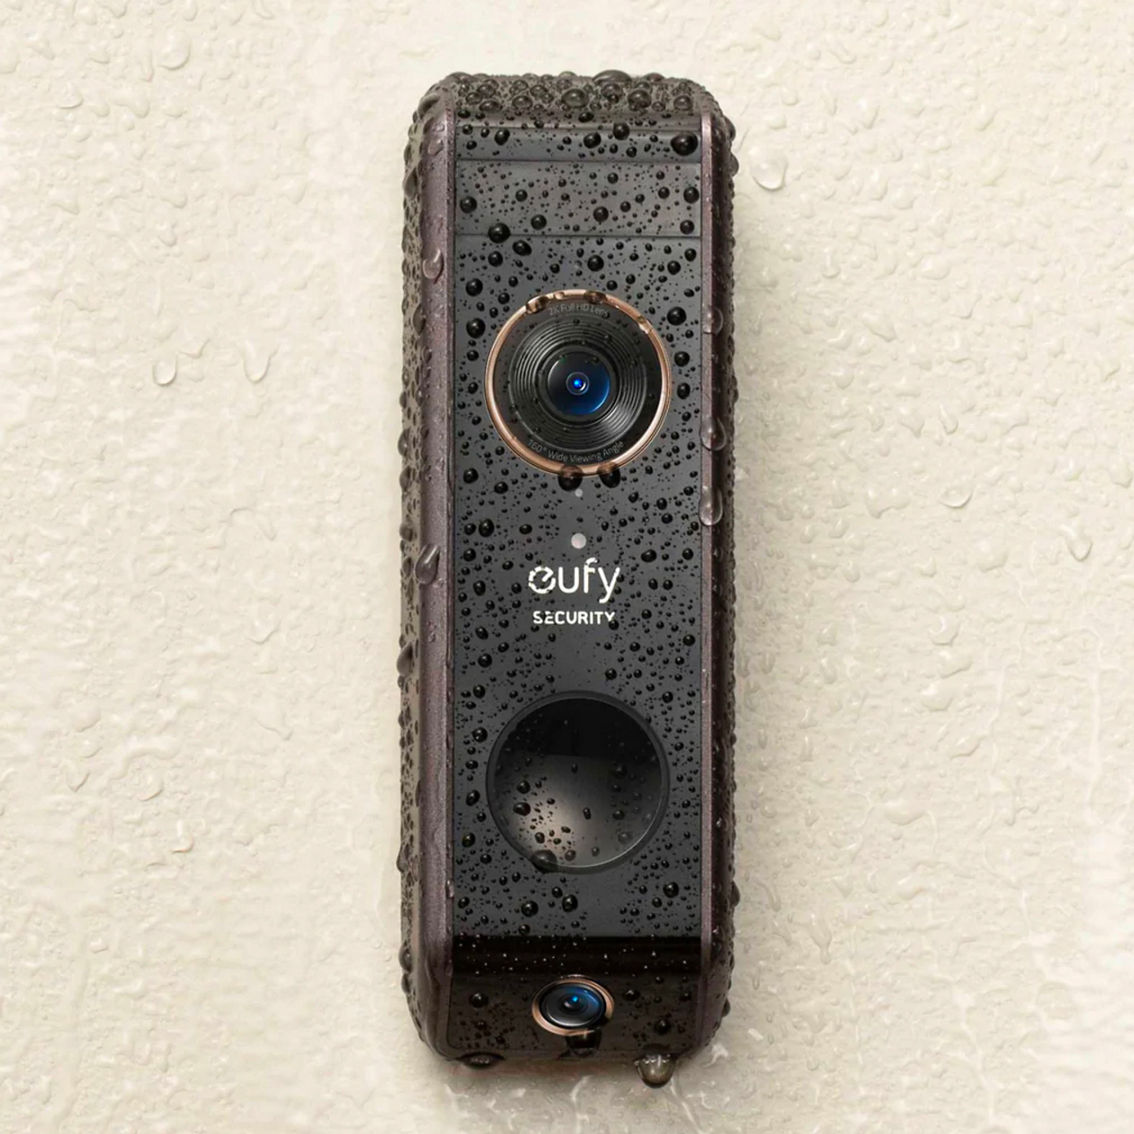 Eufy Security Smart Wi-Fi Dual Cam Video Doorbell 2K Battery - Image 3 of 9